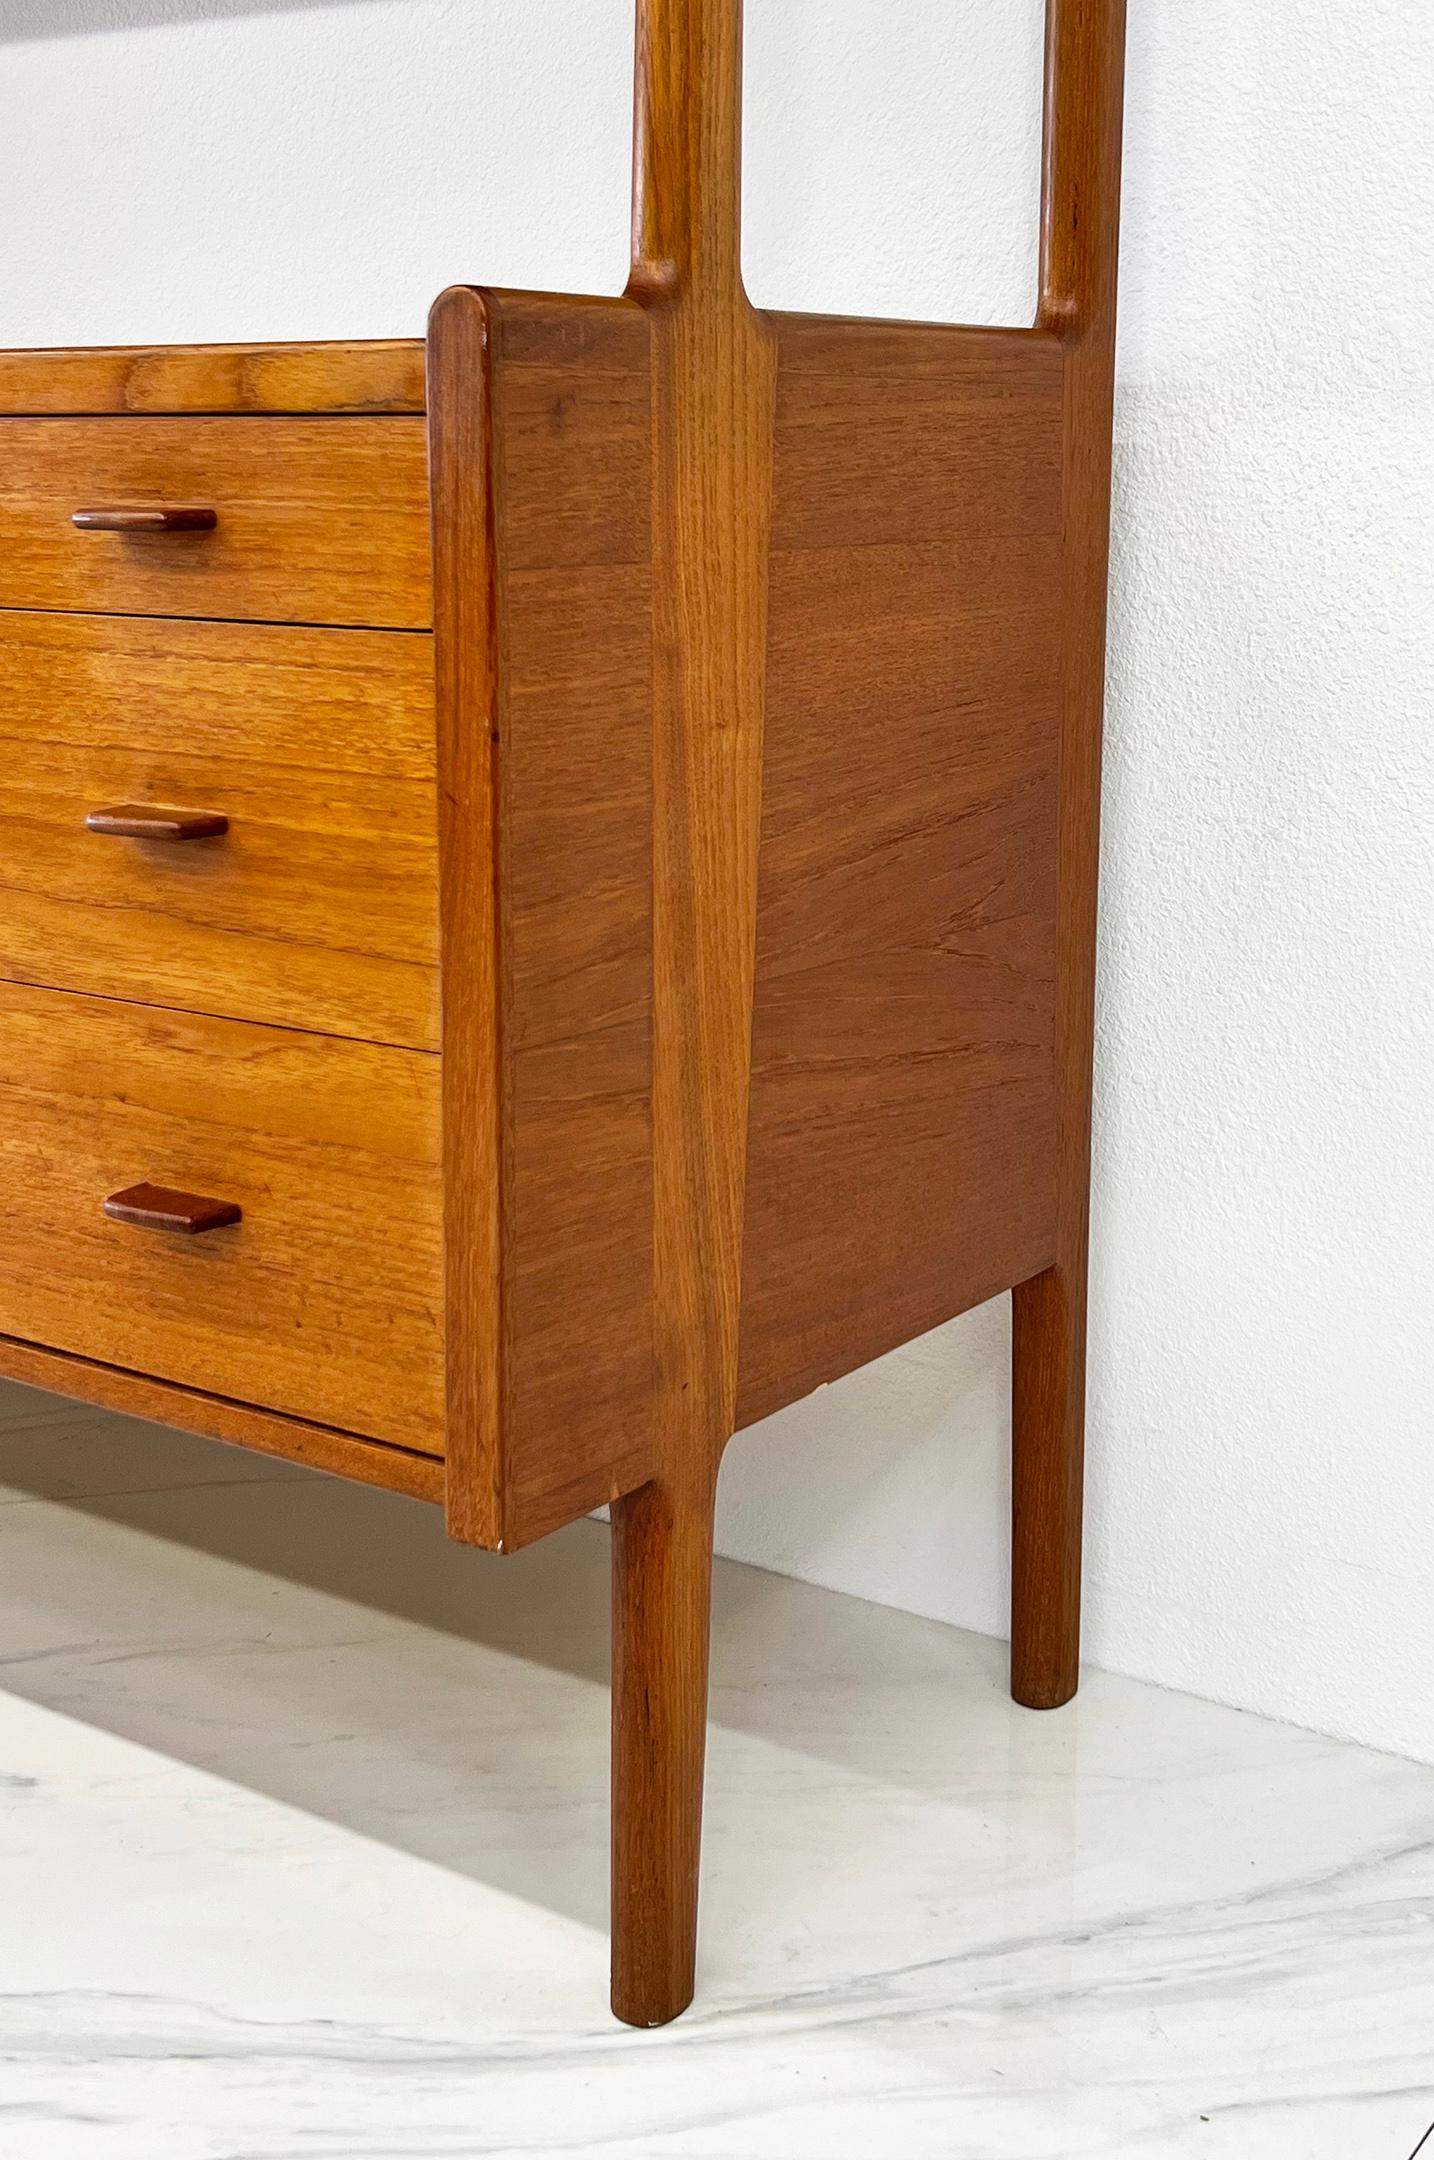 Hans Wegner for Ry Mobler Credenza Wall Unit, Teak, 1958 In Good Condition For Sale In Culver City, CA